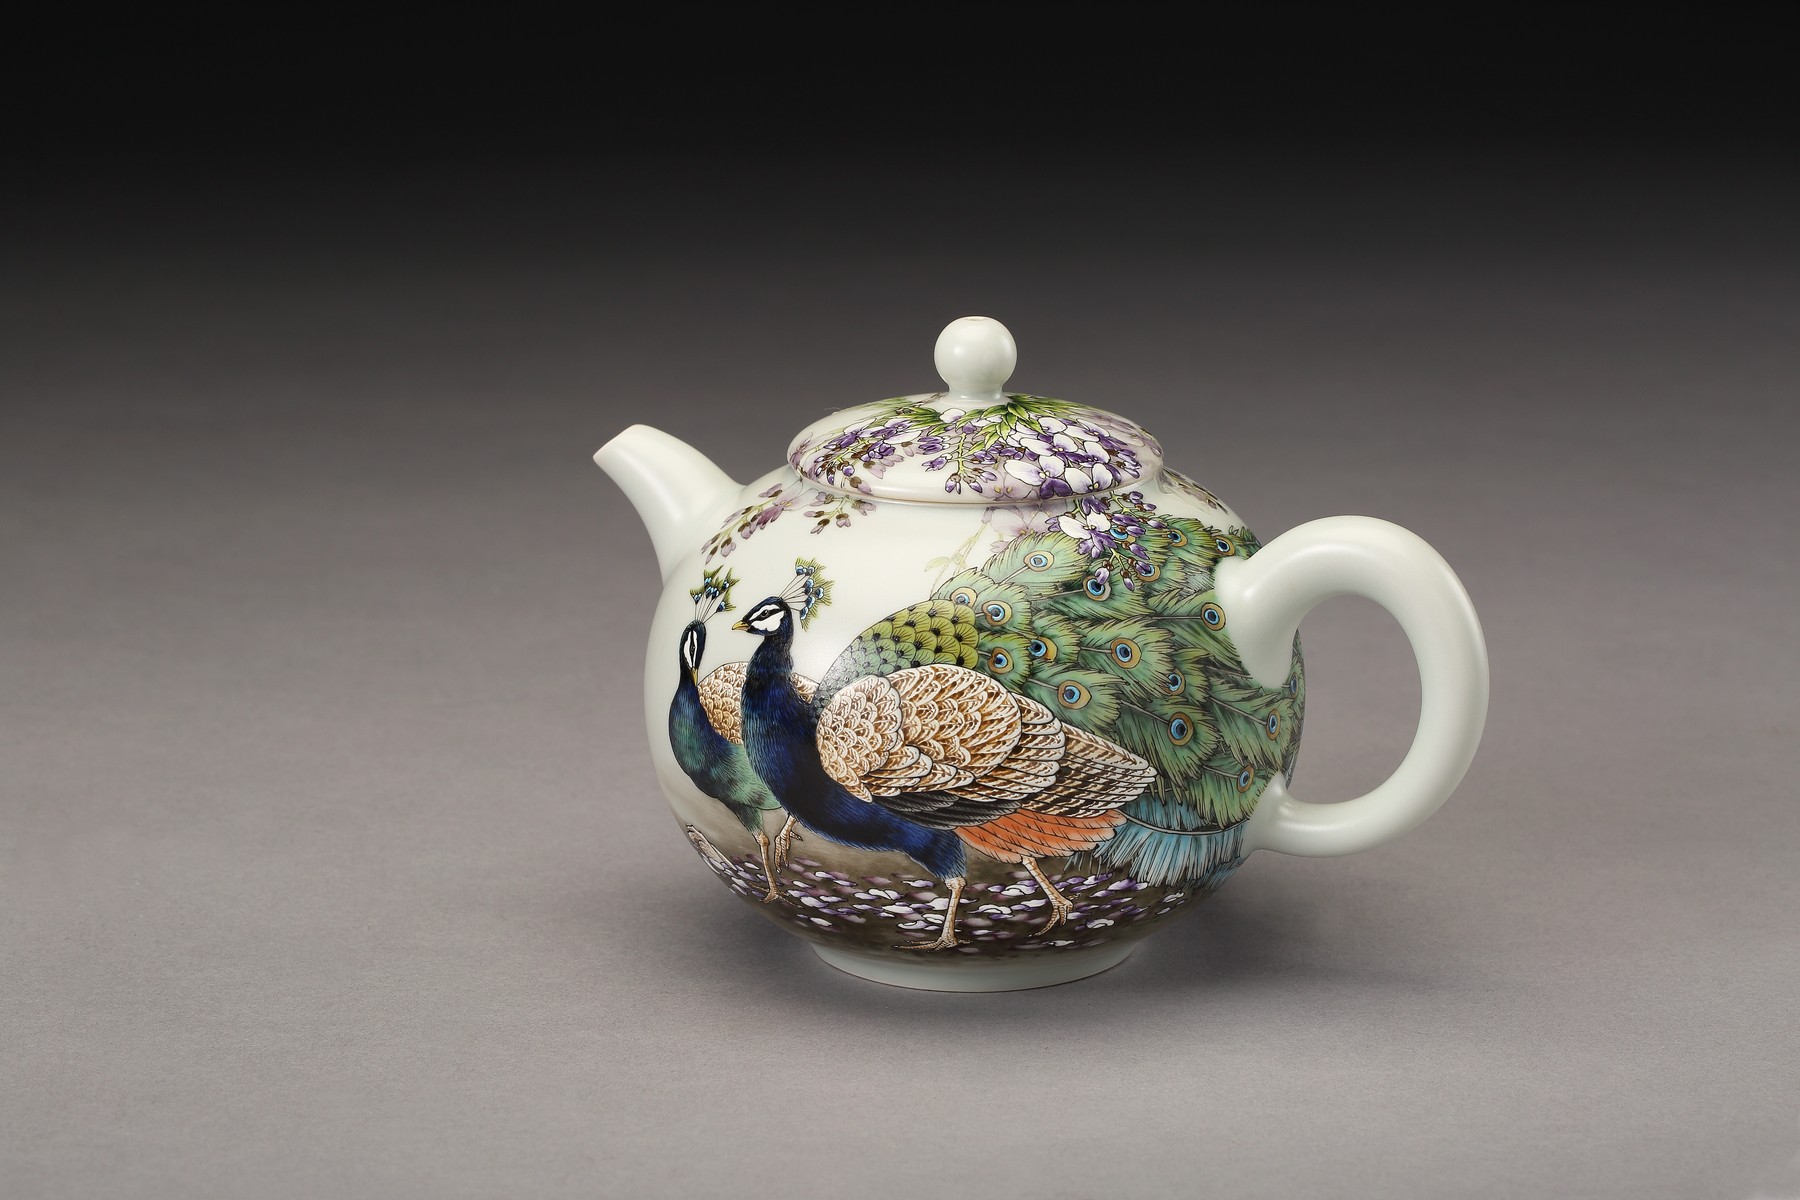 Fanned-Out Tail of Elegance: Medium Ru-ware Glazed Teapot